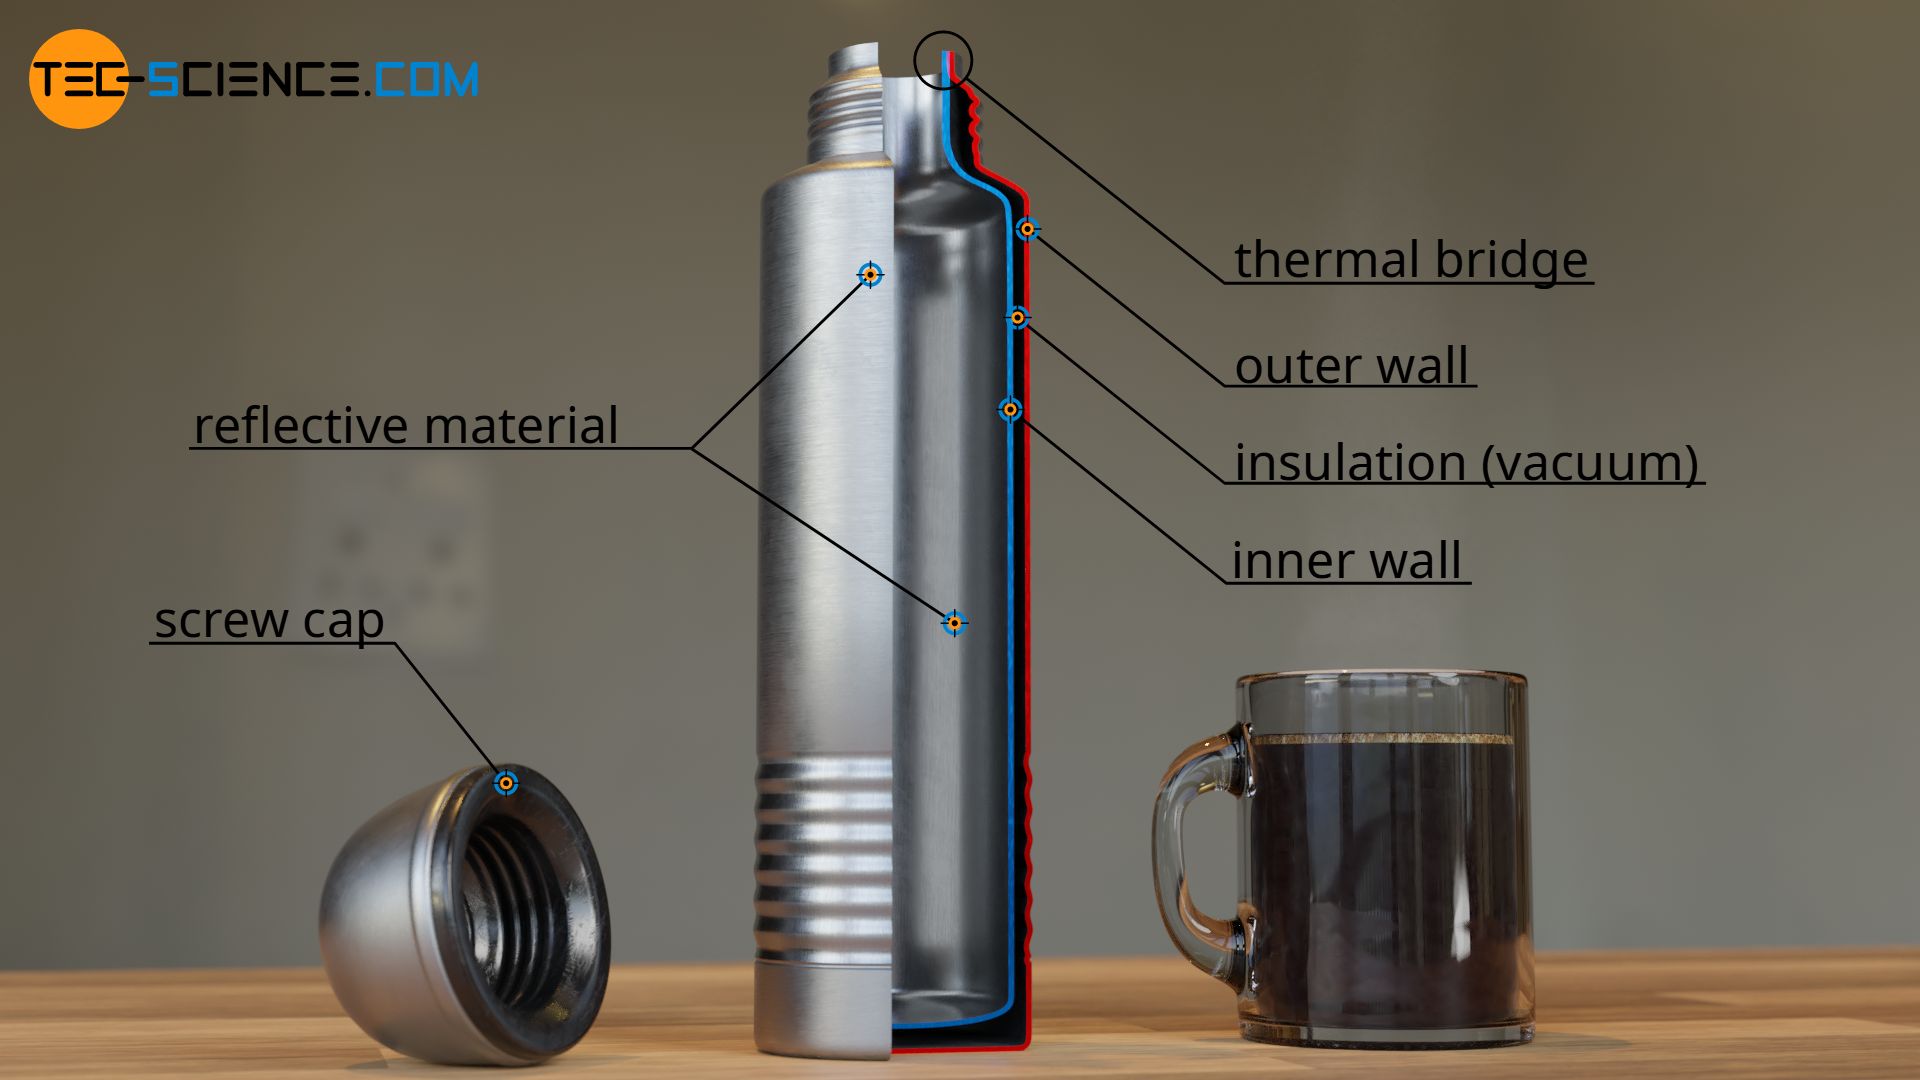 Design and principle of a thermos (vacuum flask), how does work